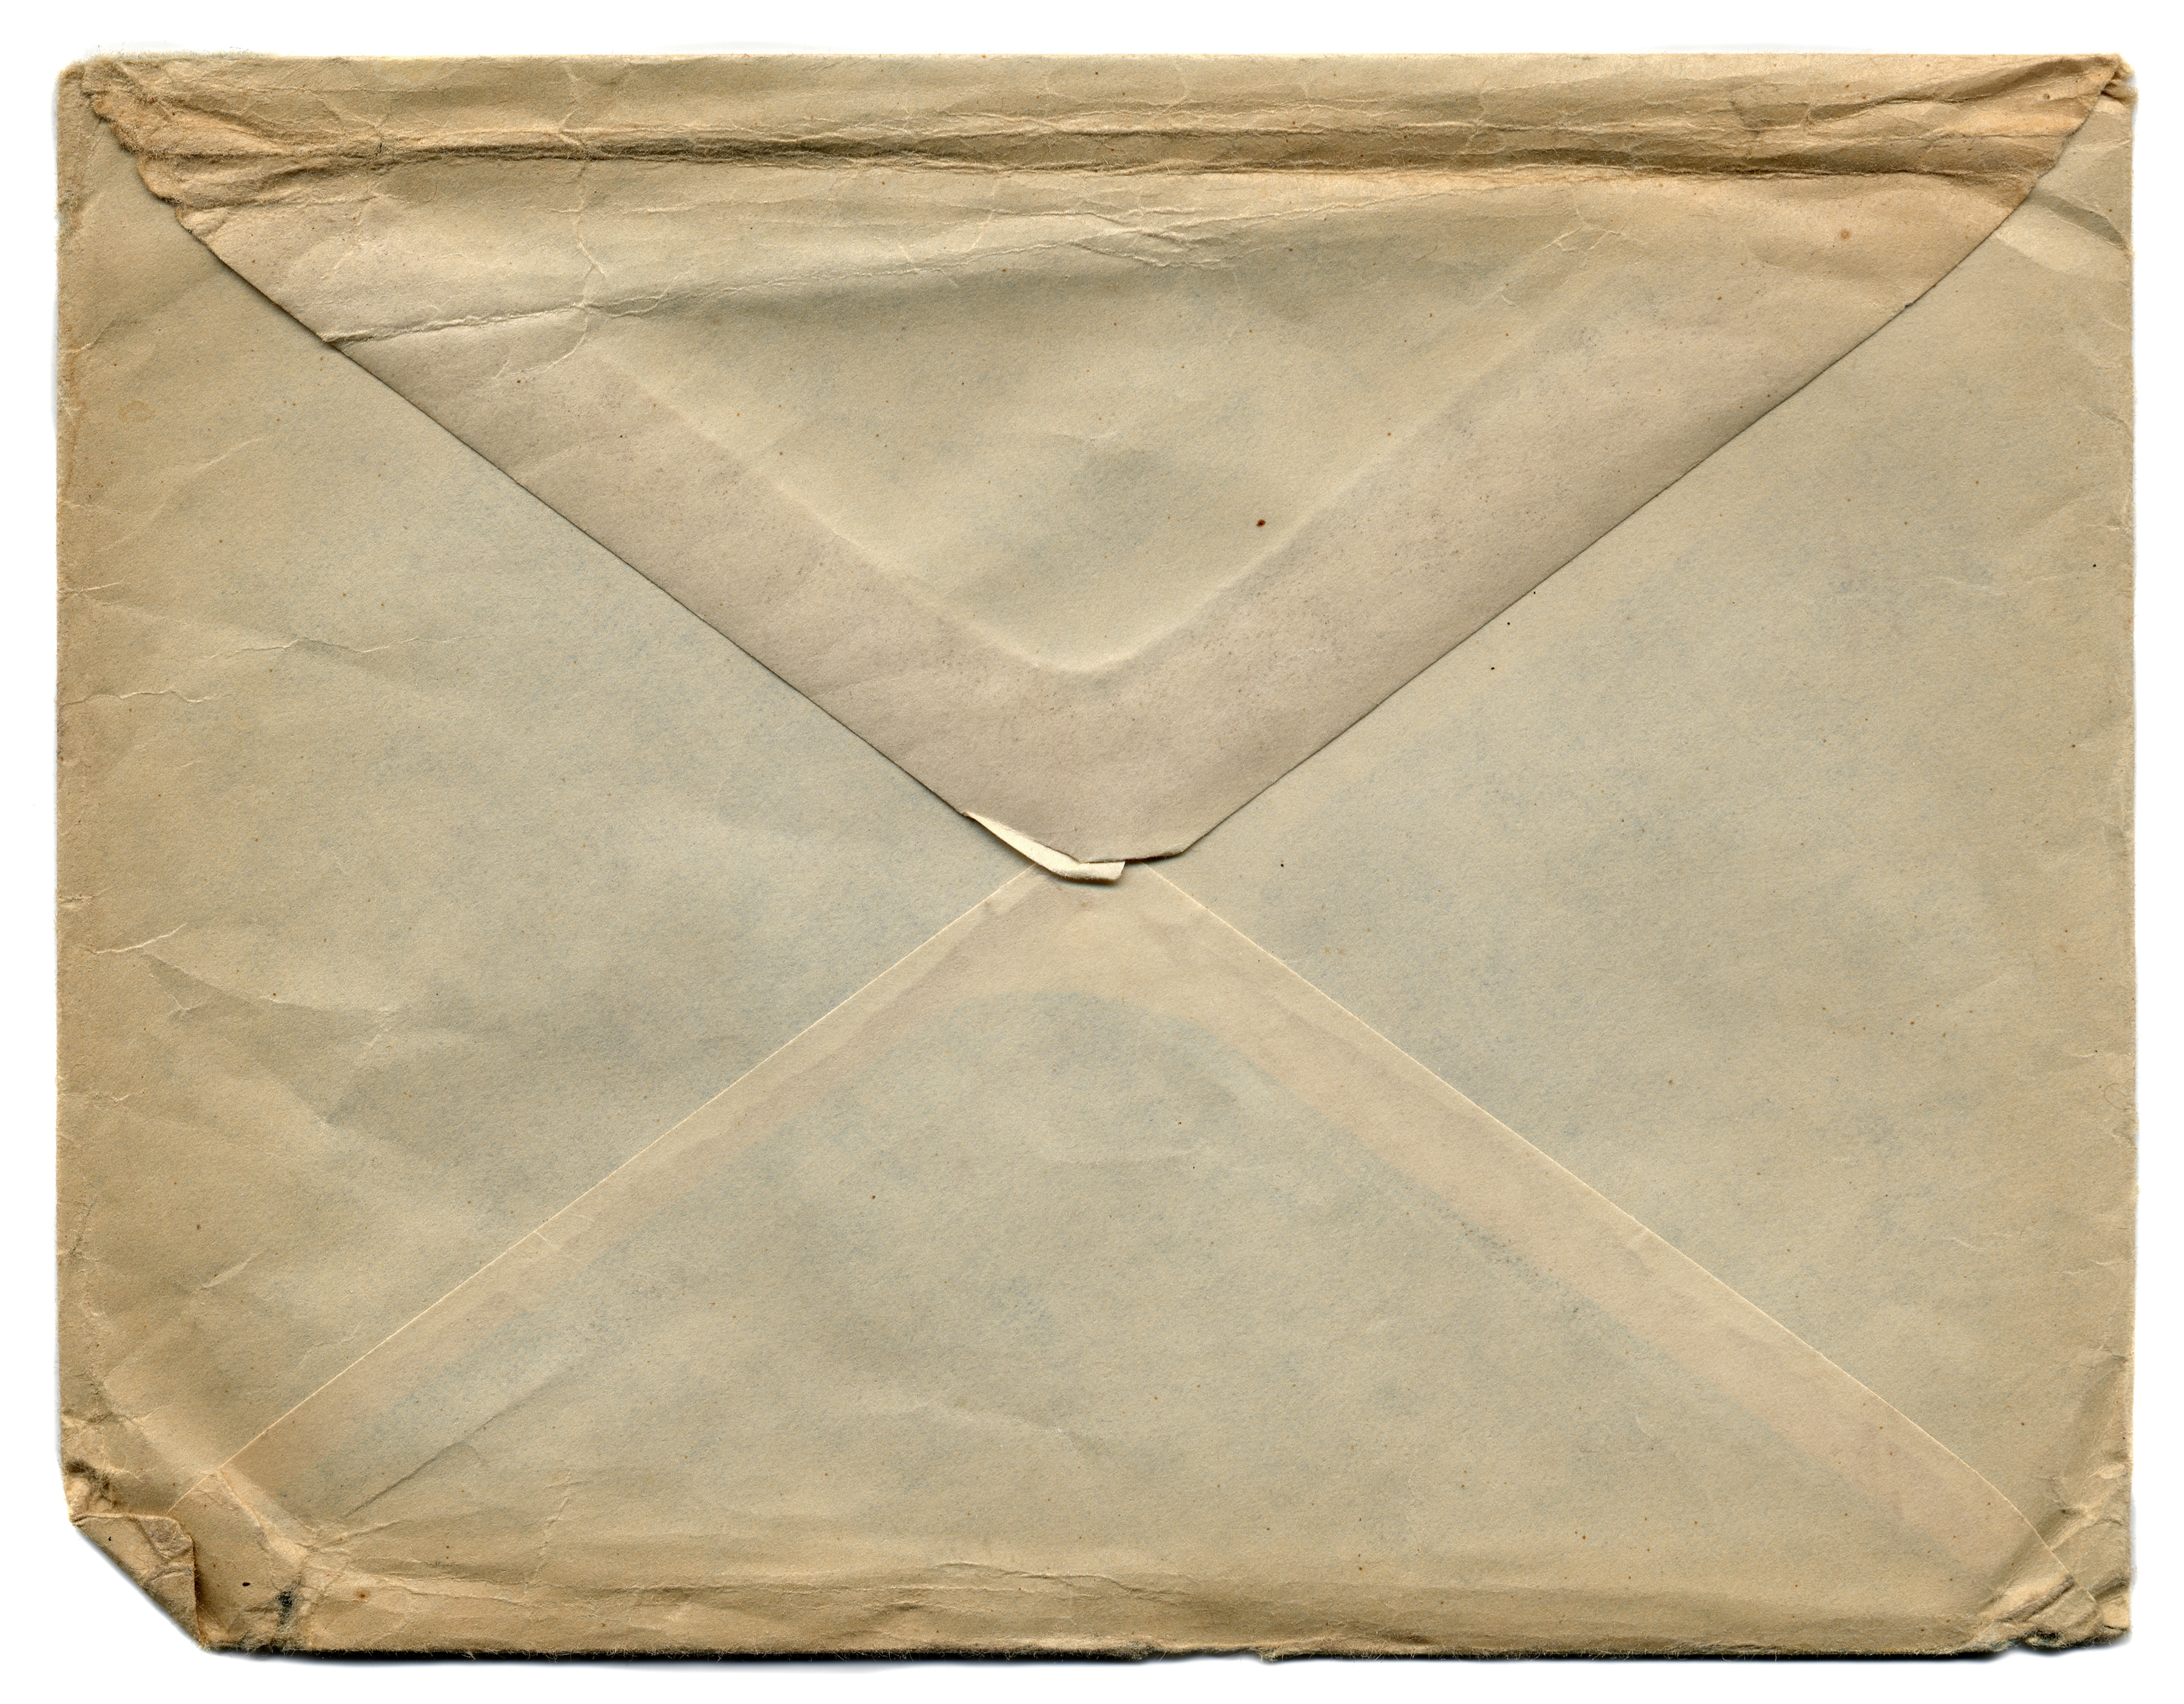 Old envelope | Source: Getty Images